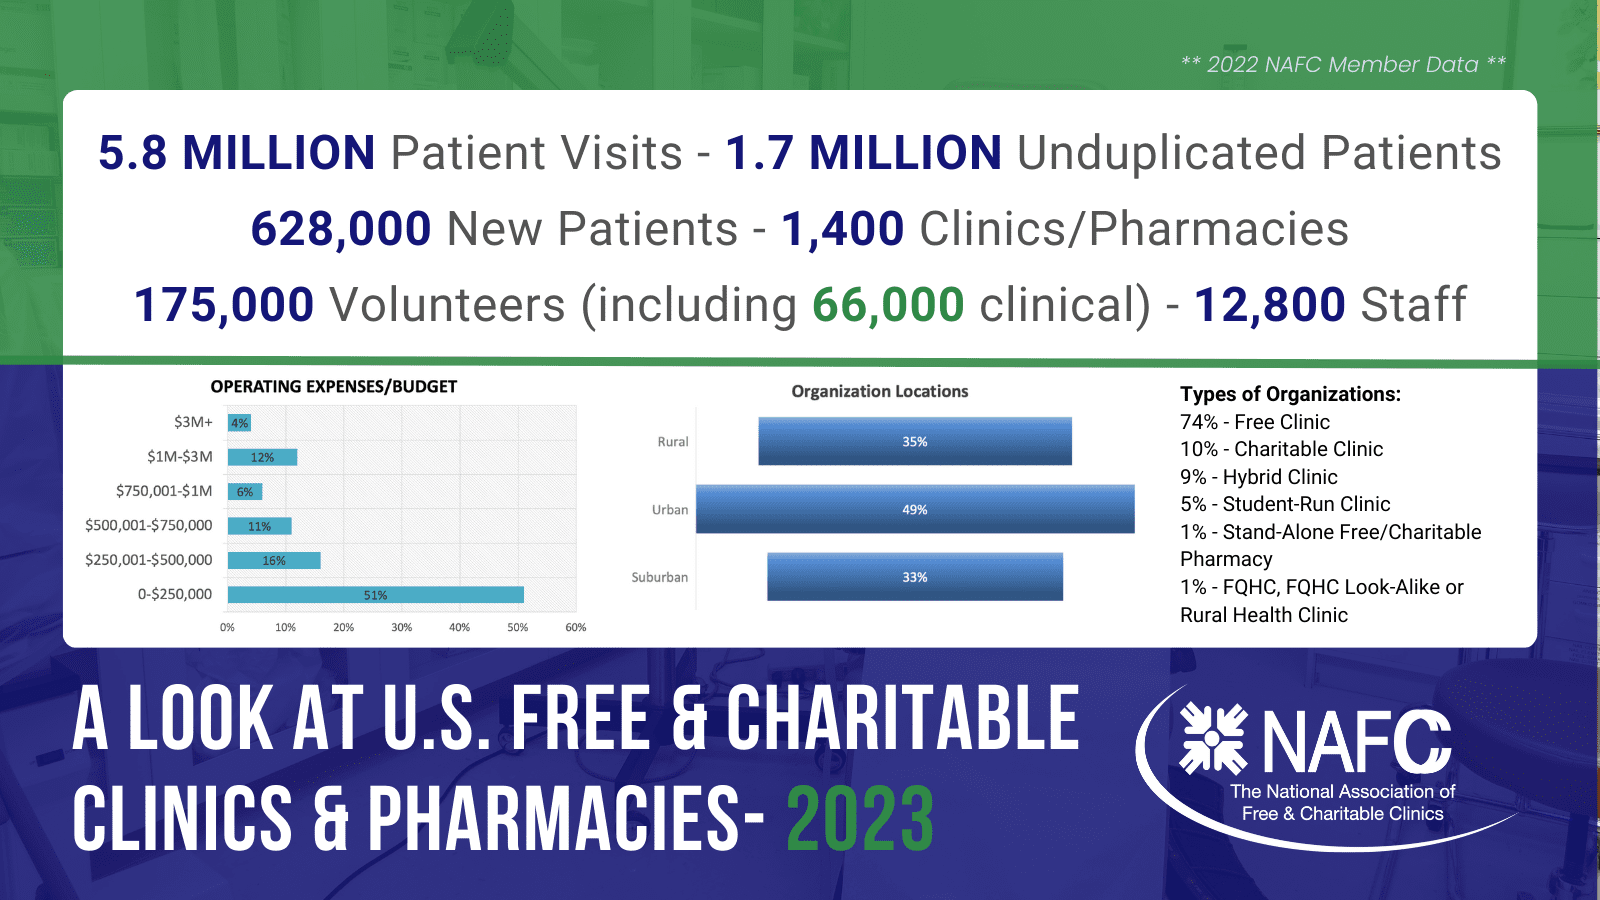 Infographic providing details from the NAFC 2023 data report on U.S. Free & Charitable Clinics